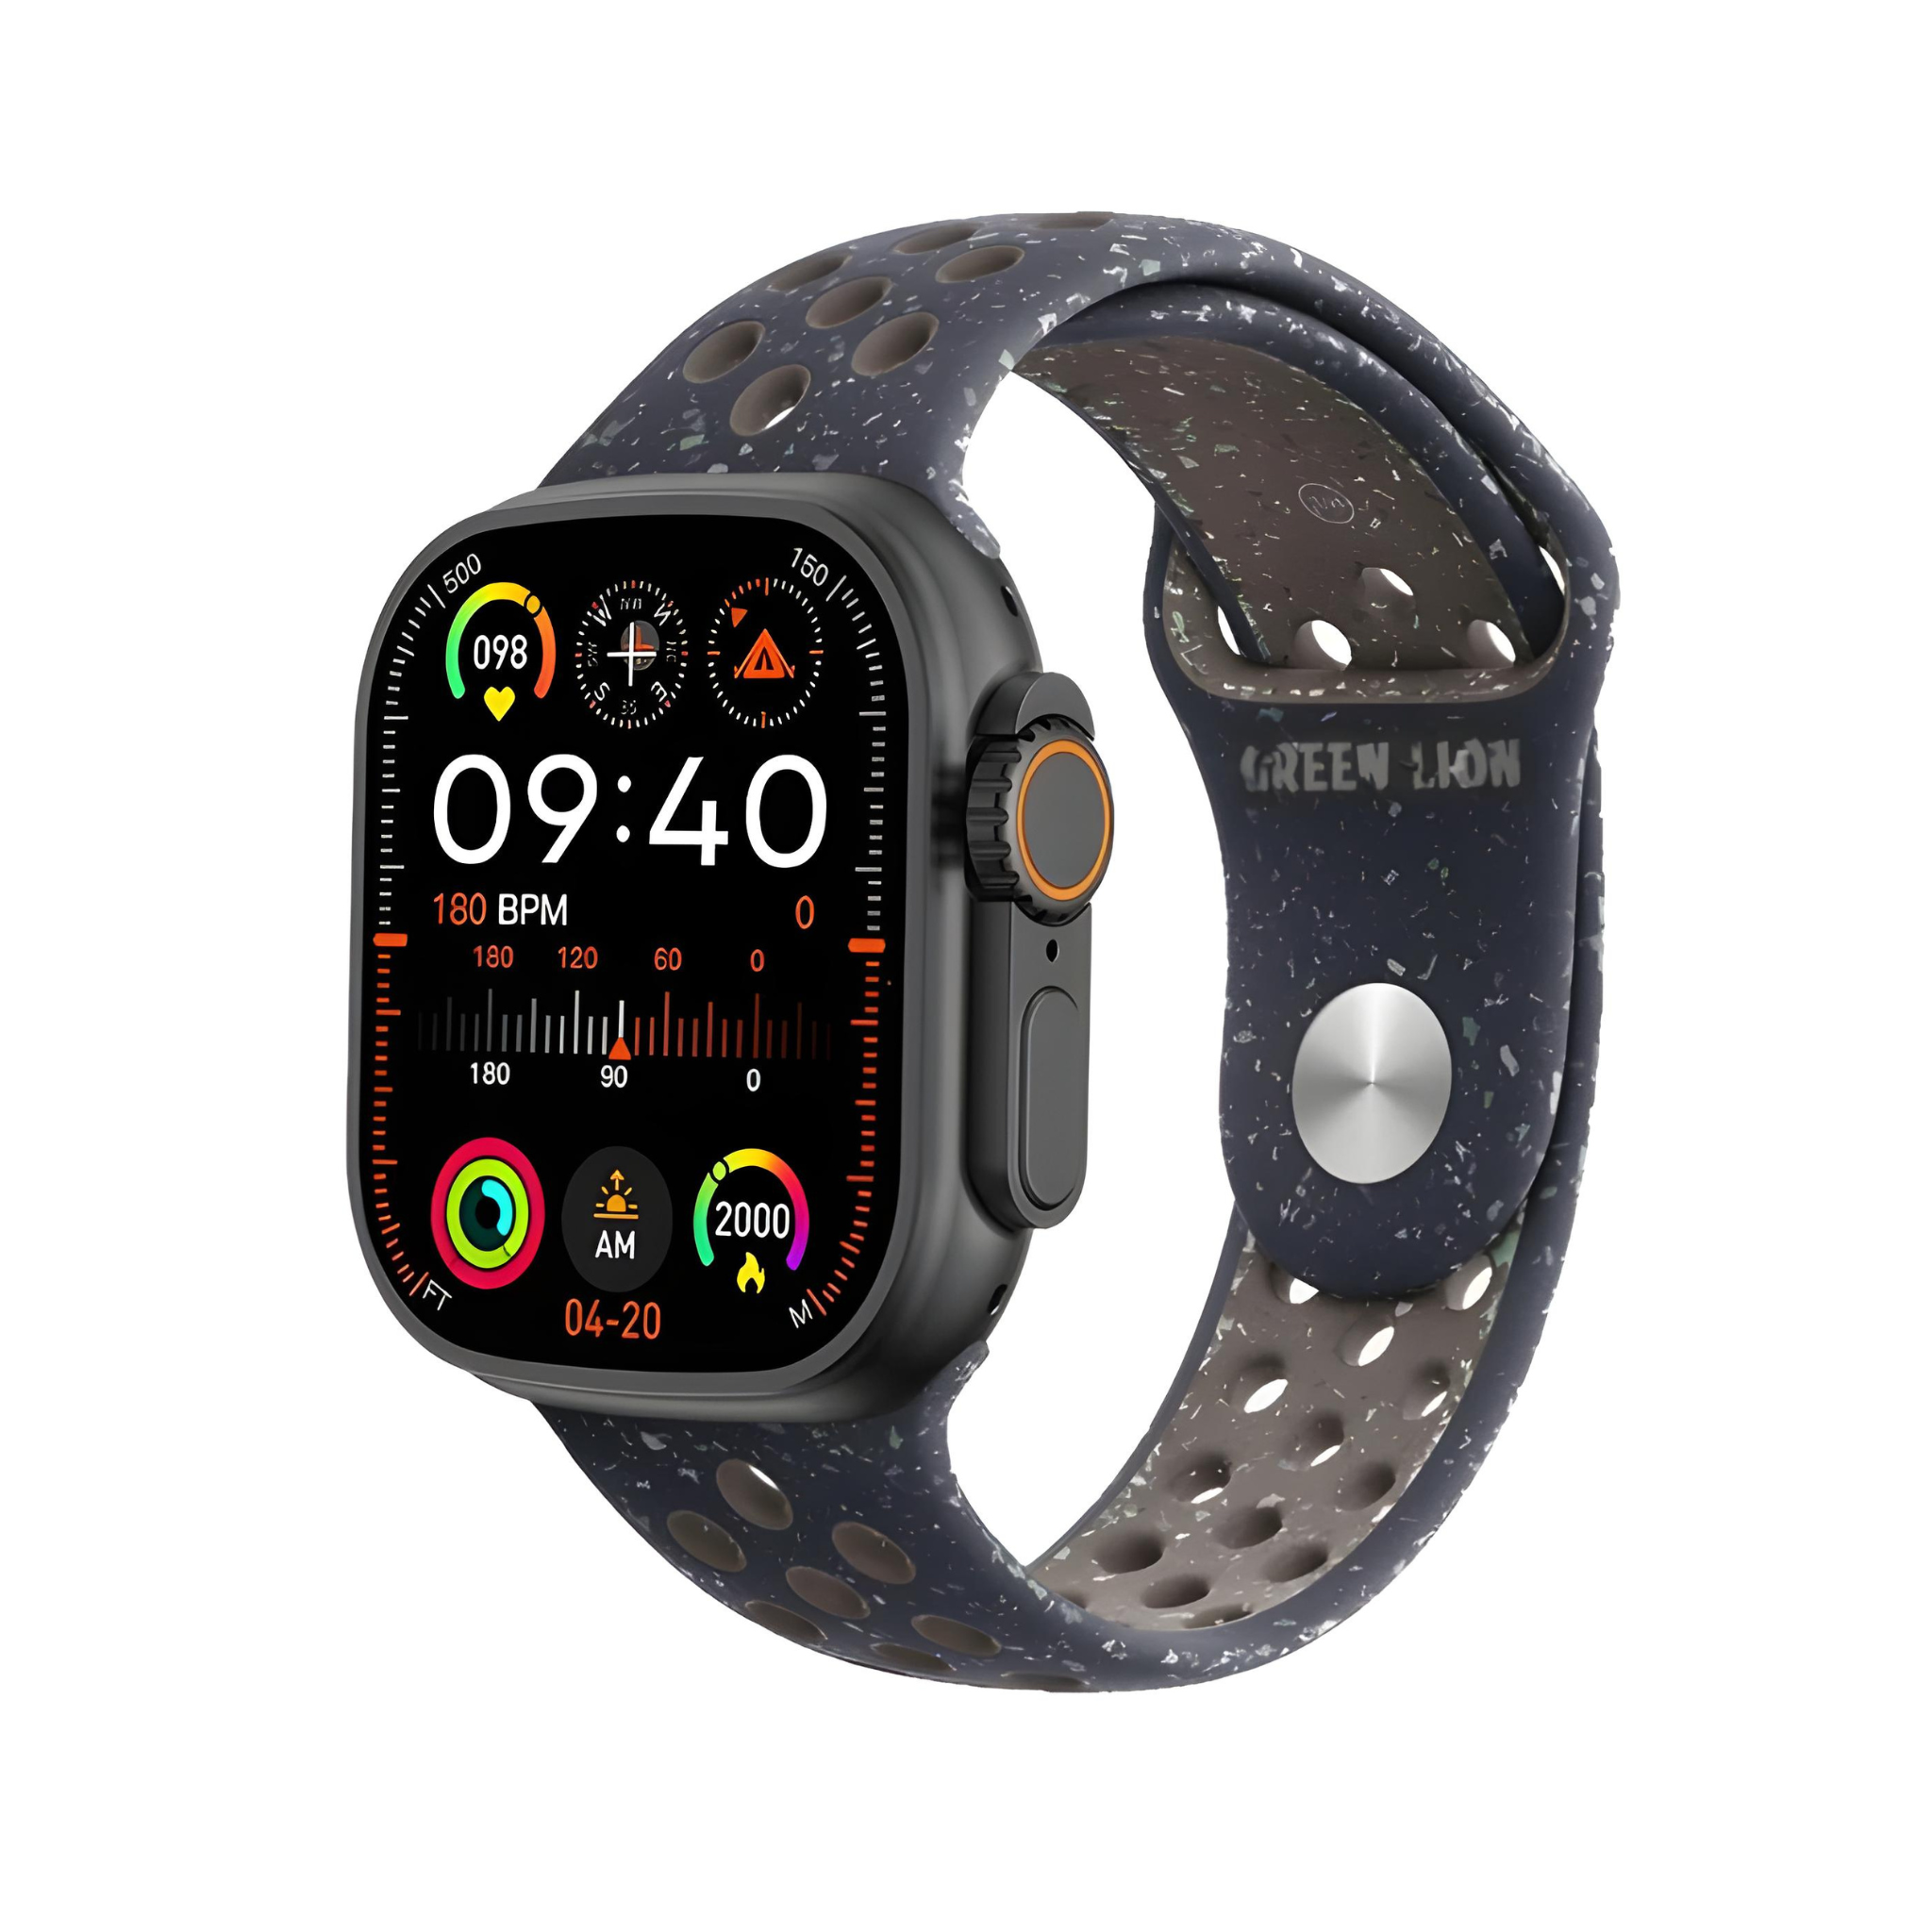 Green Lion Ultra Active Smart Watch Premium Quality - Waterproof, Fitness Tracker, Heart Rate Monitor, and Notification Center